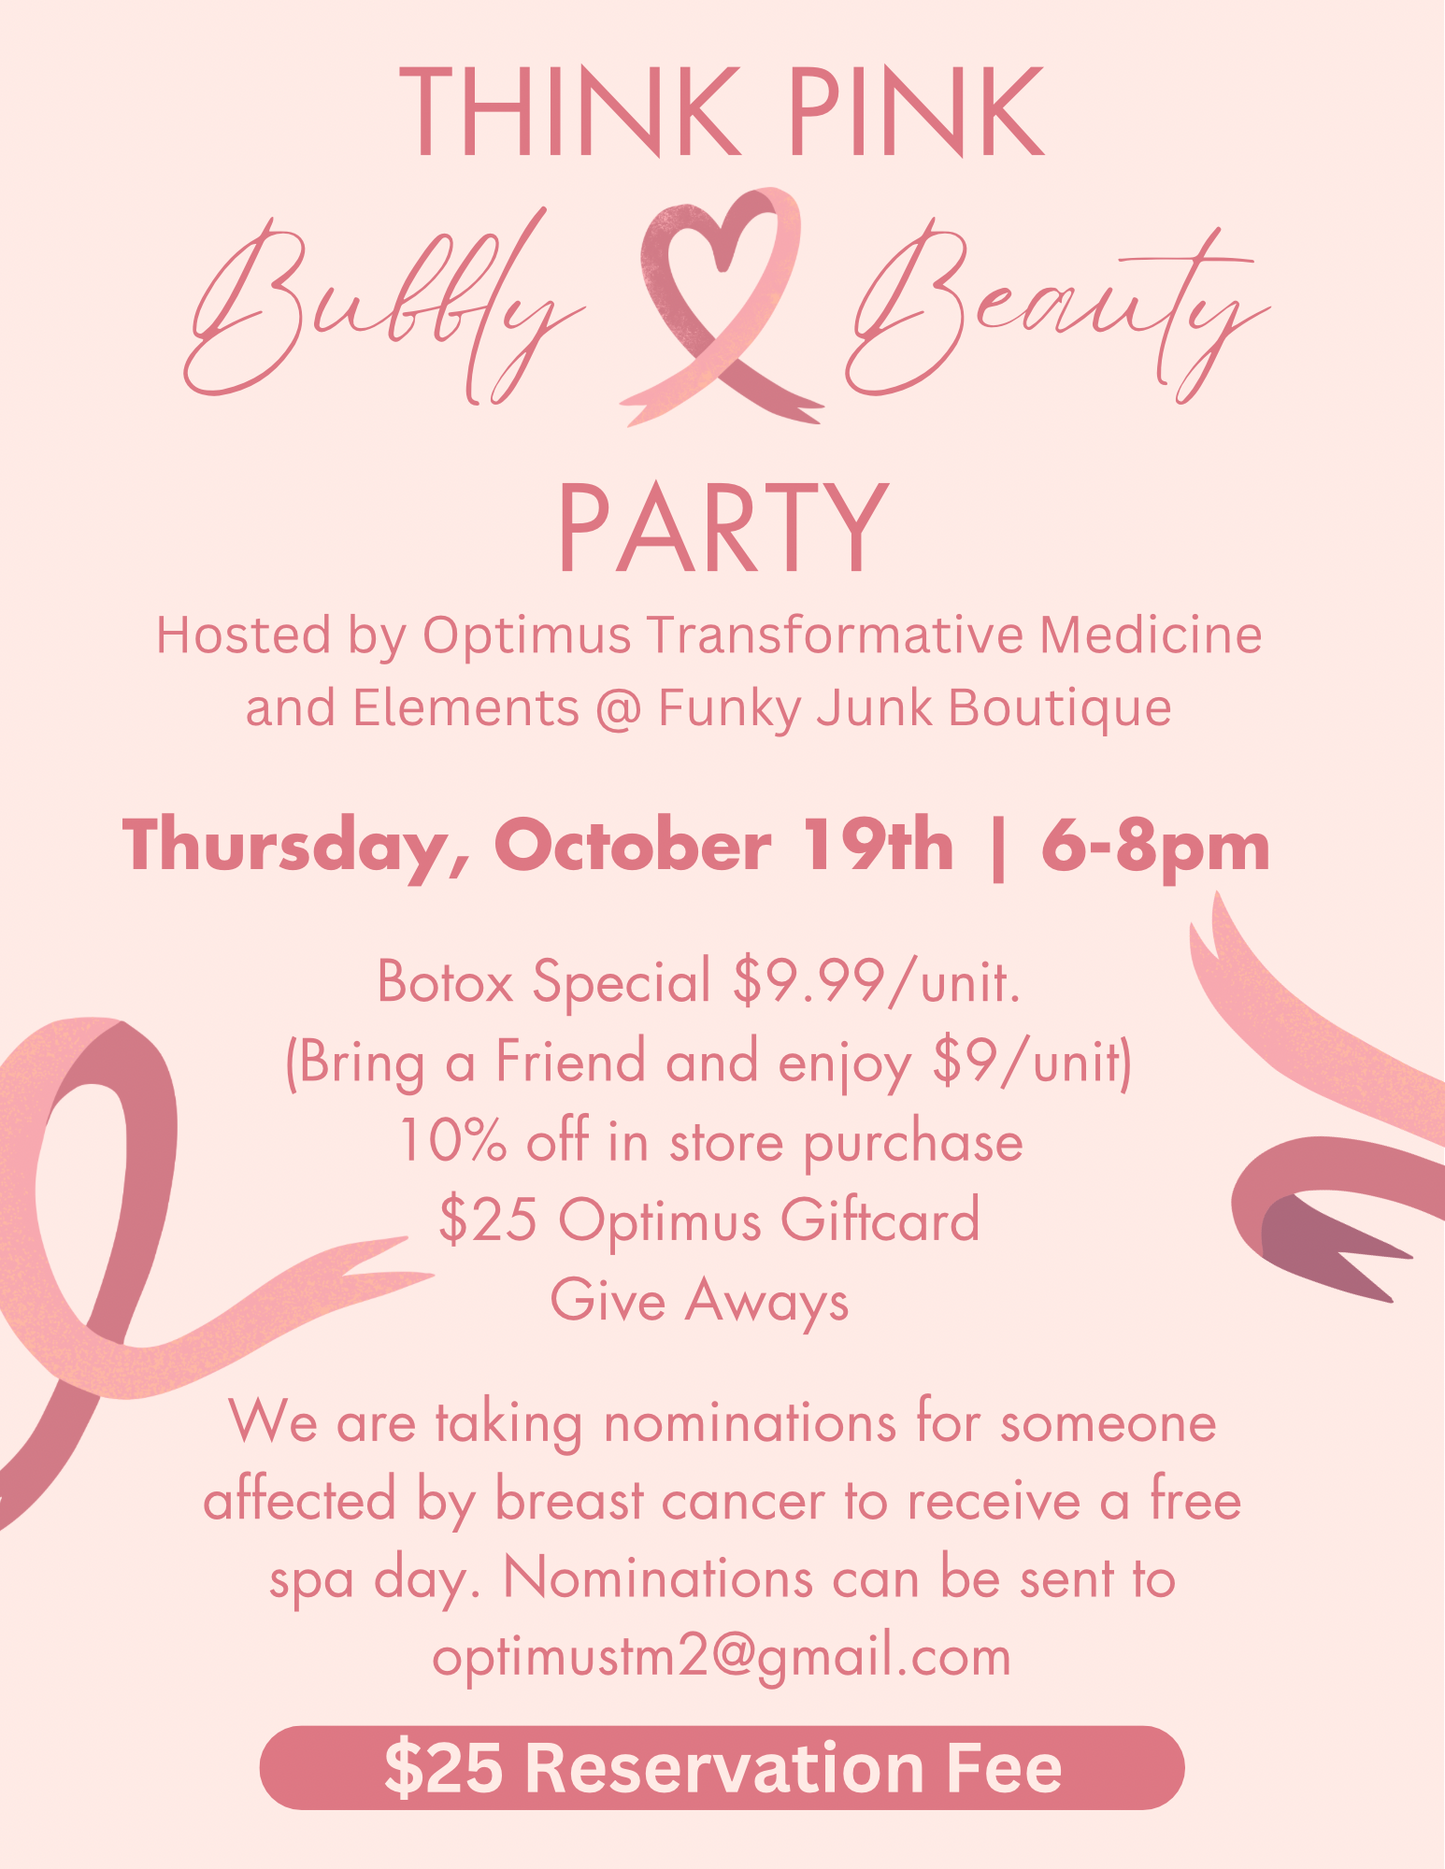 Think Pink | Bubbly & Beauty Party 